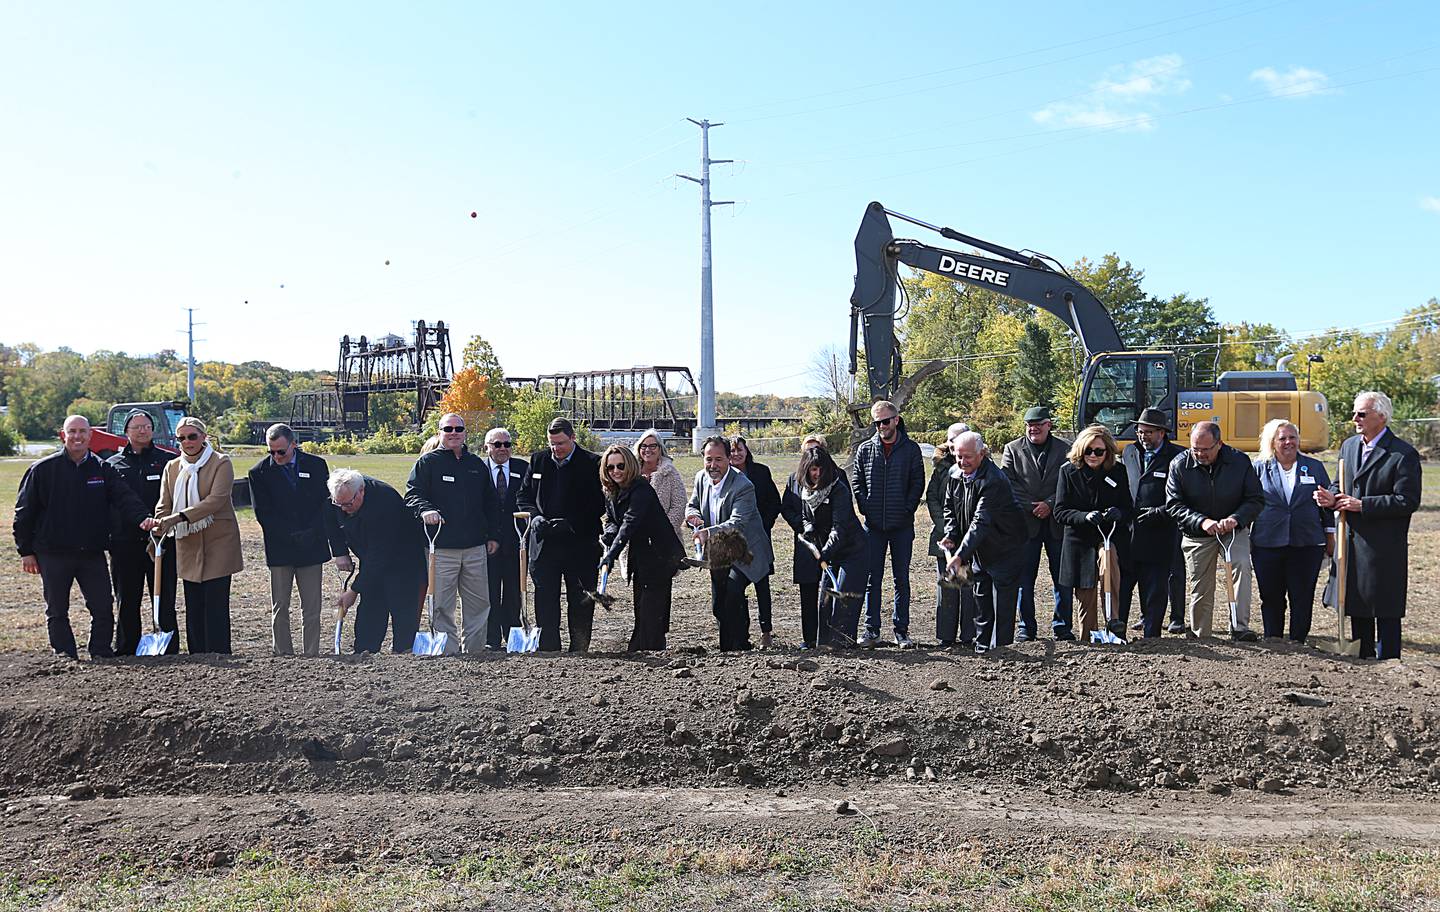 Ottawa YMCA board members, politicans, donors, and other guests of honor shovel dirt during the Ottawa YMCA  groundbreaking ceremony for the new YMCA on Tuesday, Oct. 18, 2022 in Ottawa.